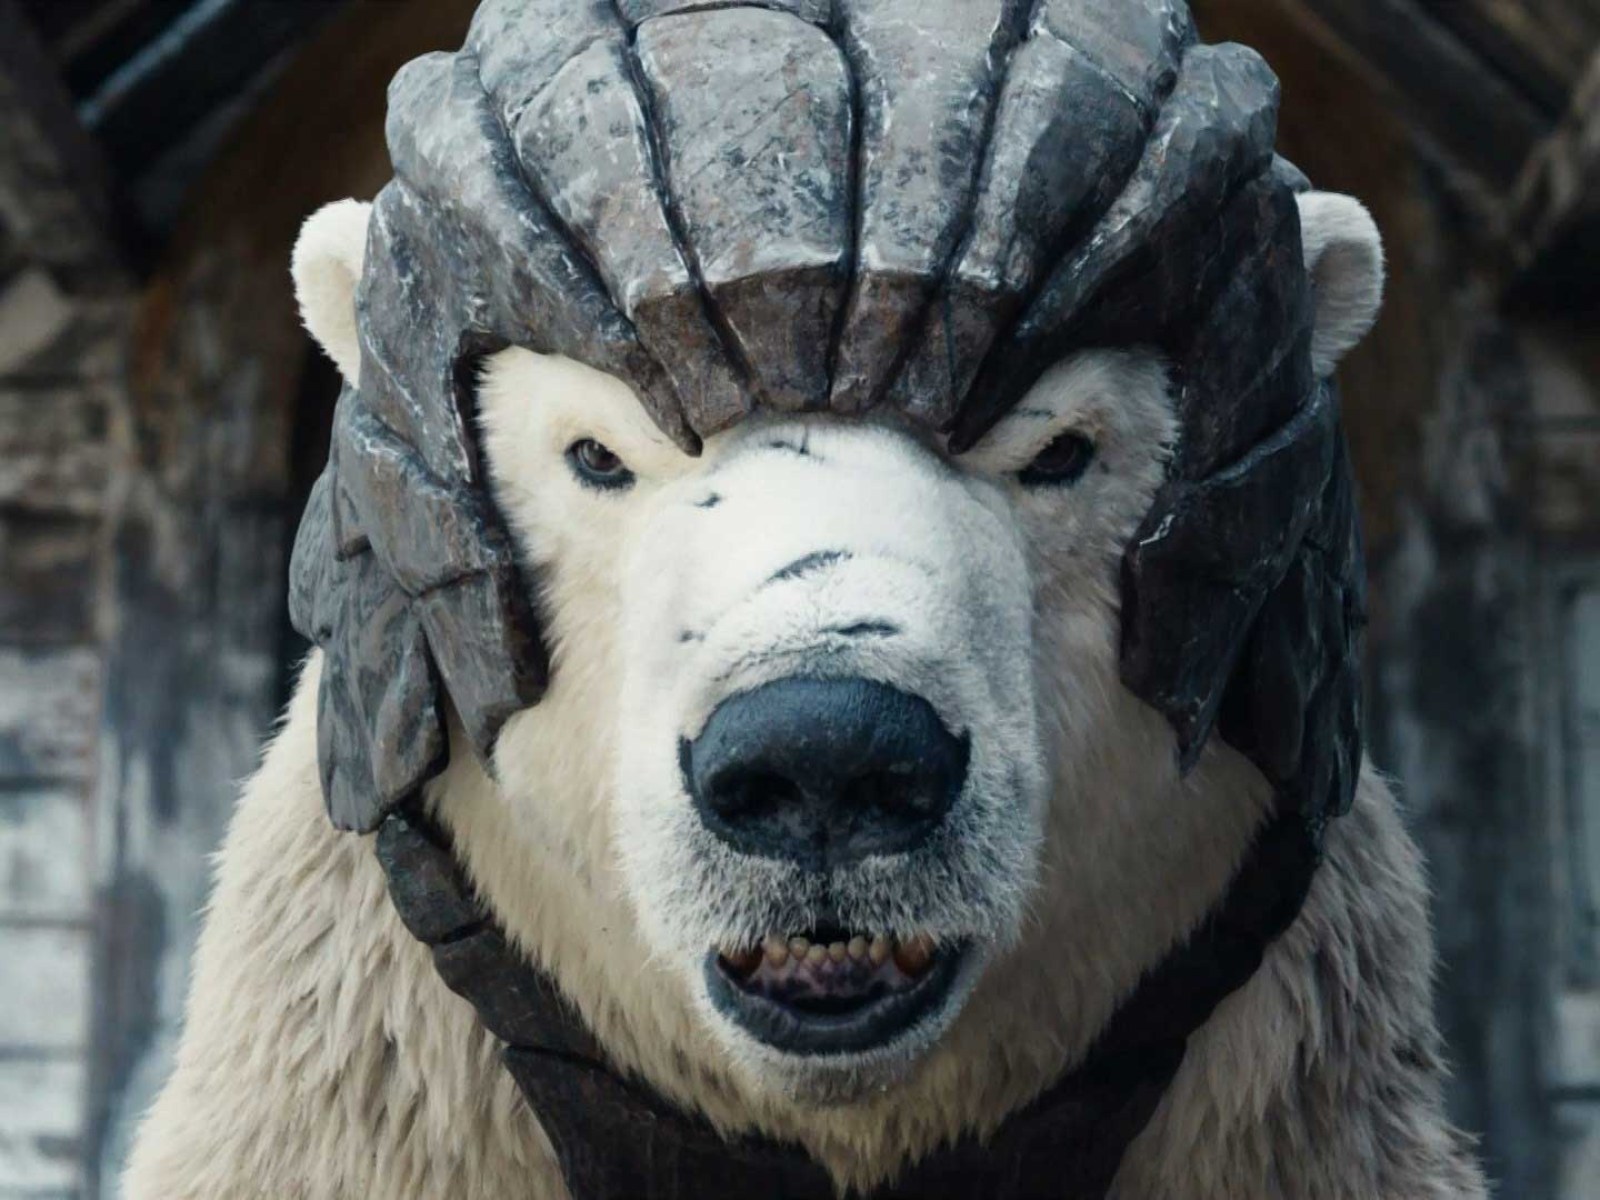 His Dark Materials' Iorek Byrnison Voice: Who Voices the in the HBO series?